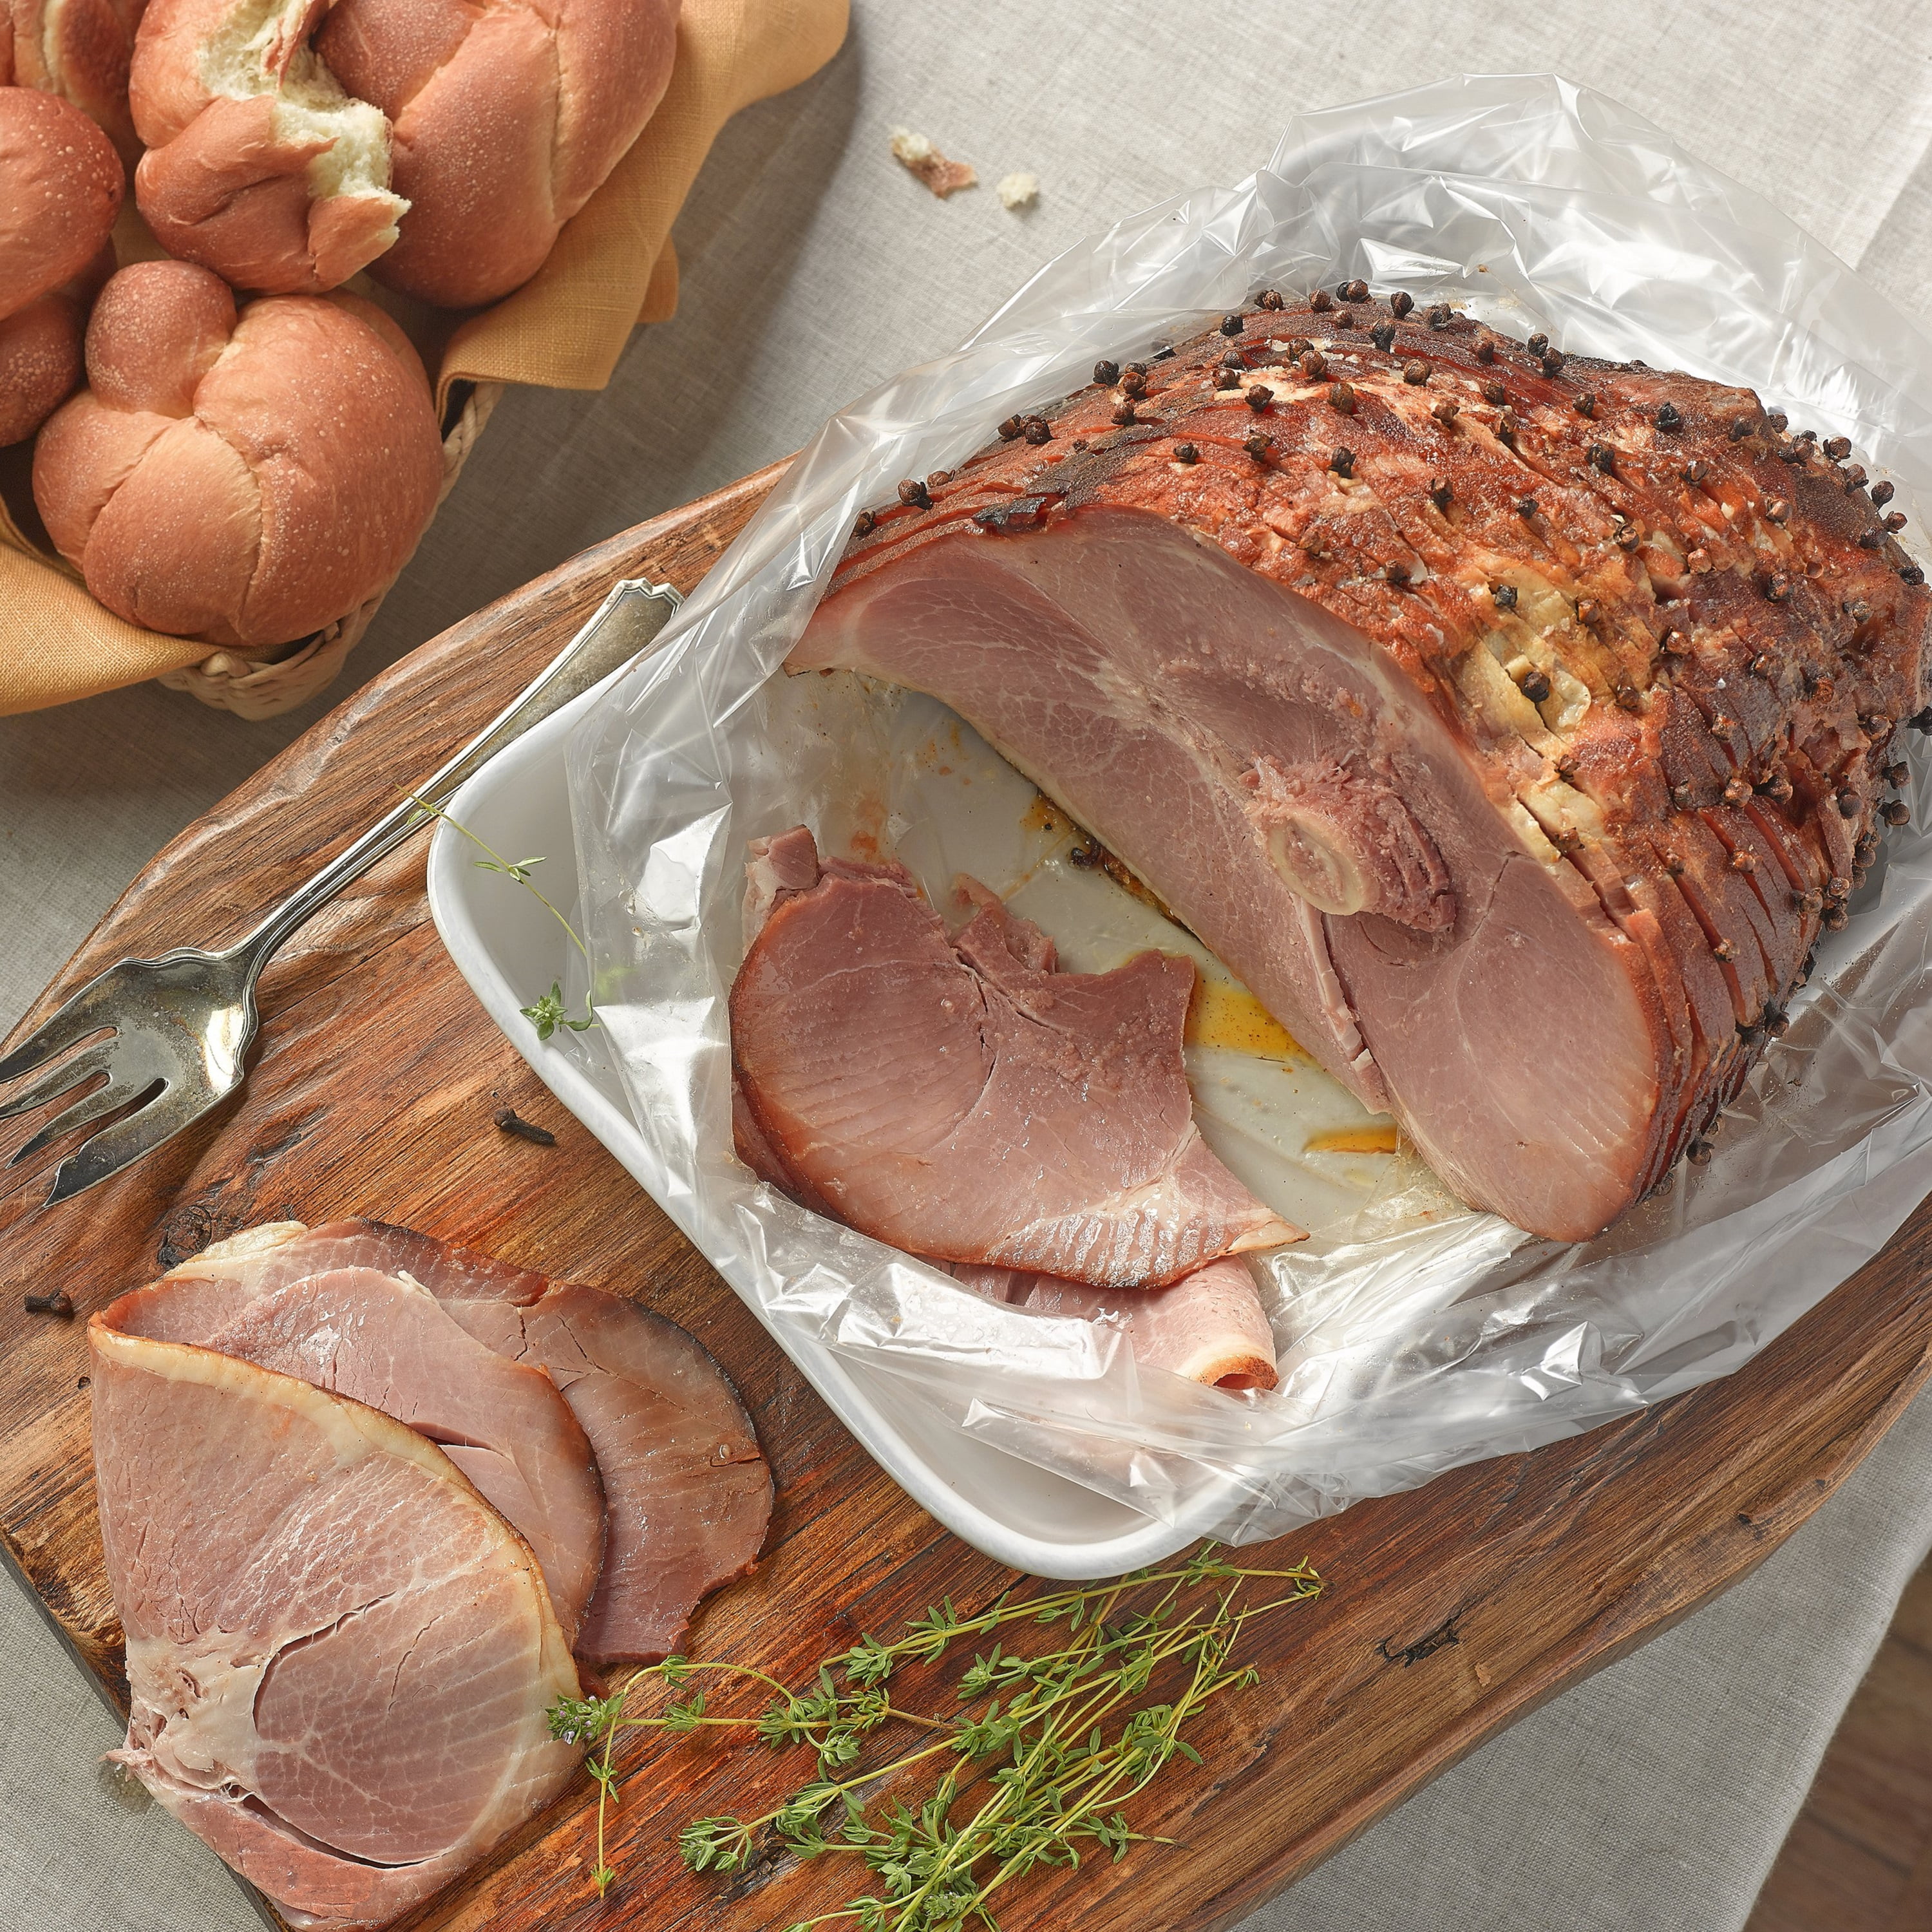 Save on Reynolds Kitchens Oven Bags For Tender Meat 16 x 17.5 Inch Order  Online Delivery